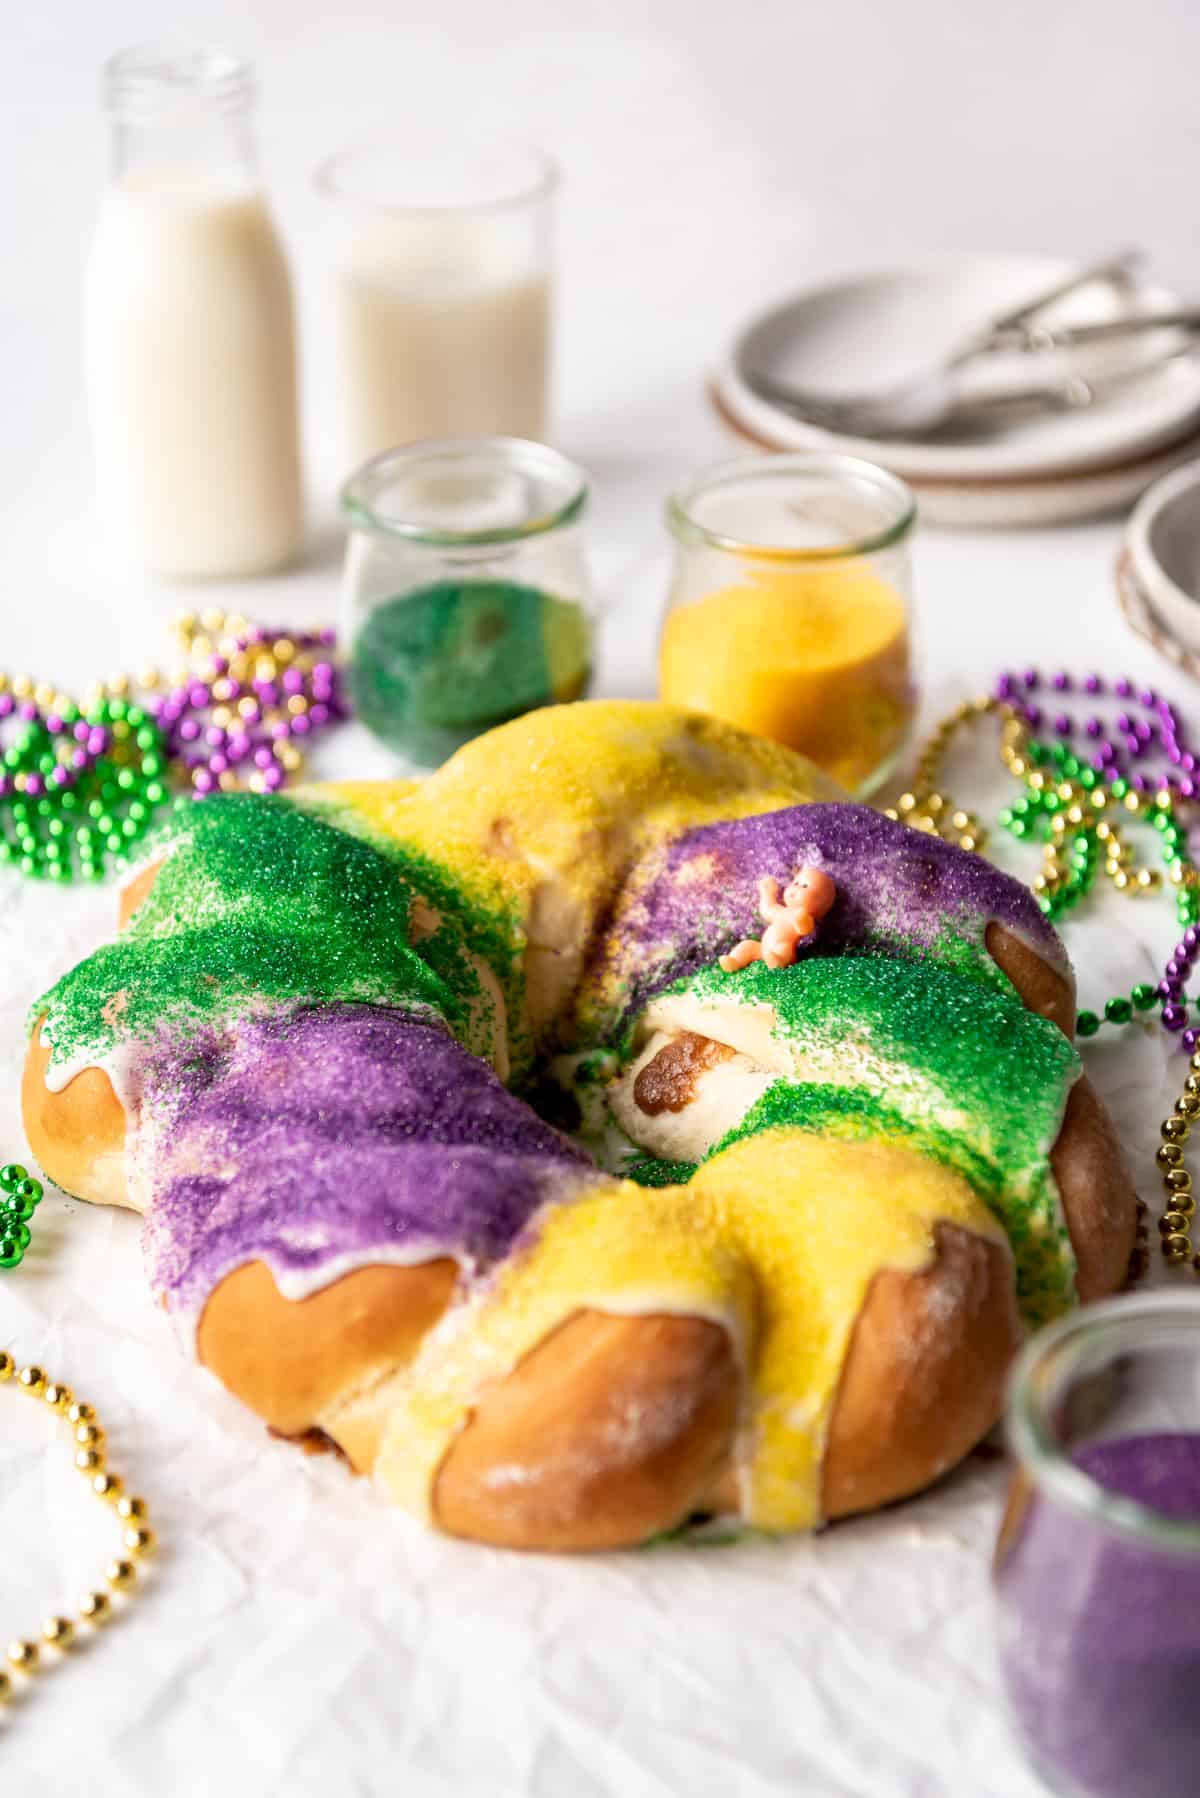 A homemade king cake covered with colored sugar in front of glasses of milk and plates.